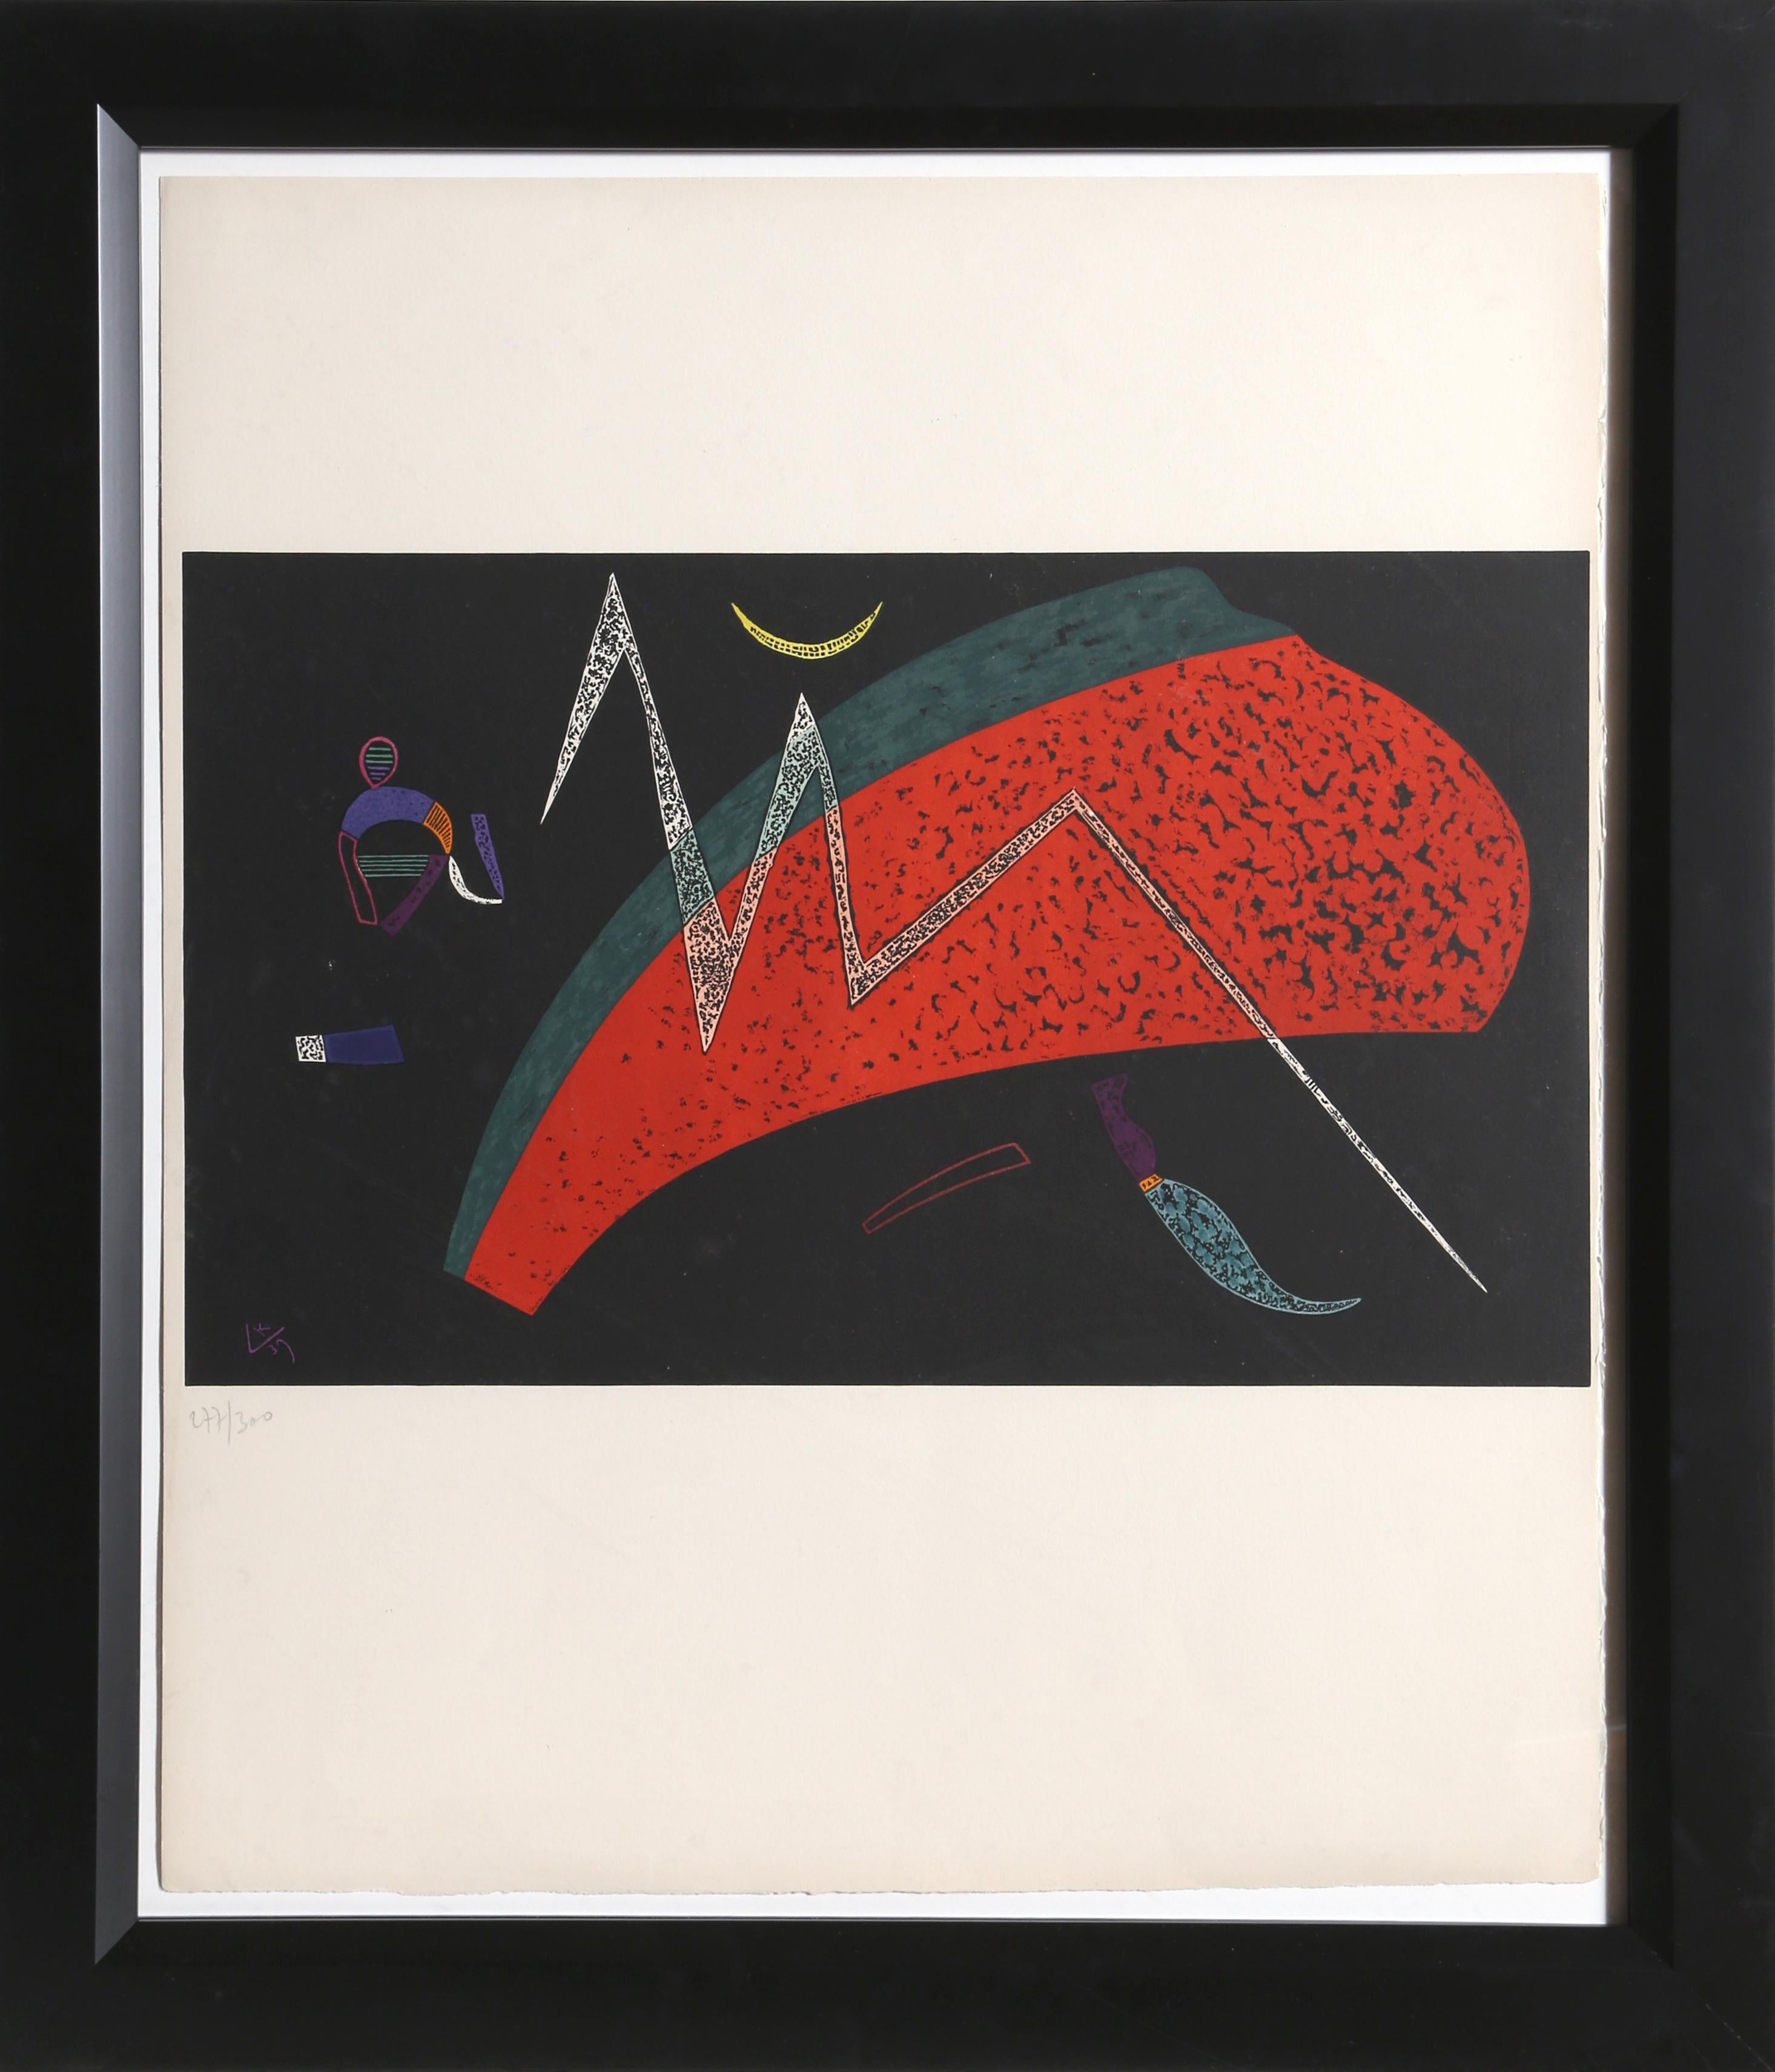 (after) Wassily Kandinsky Abstract Print - Watermelon